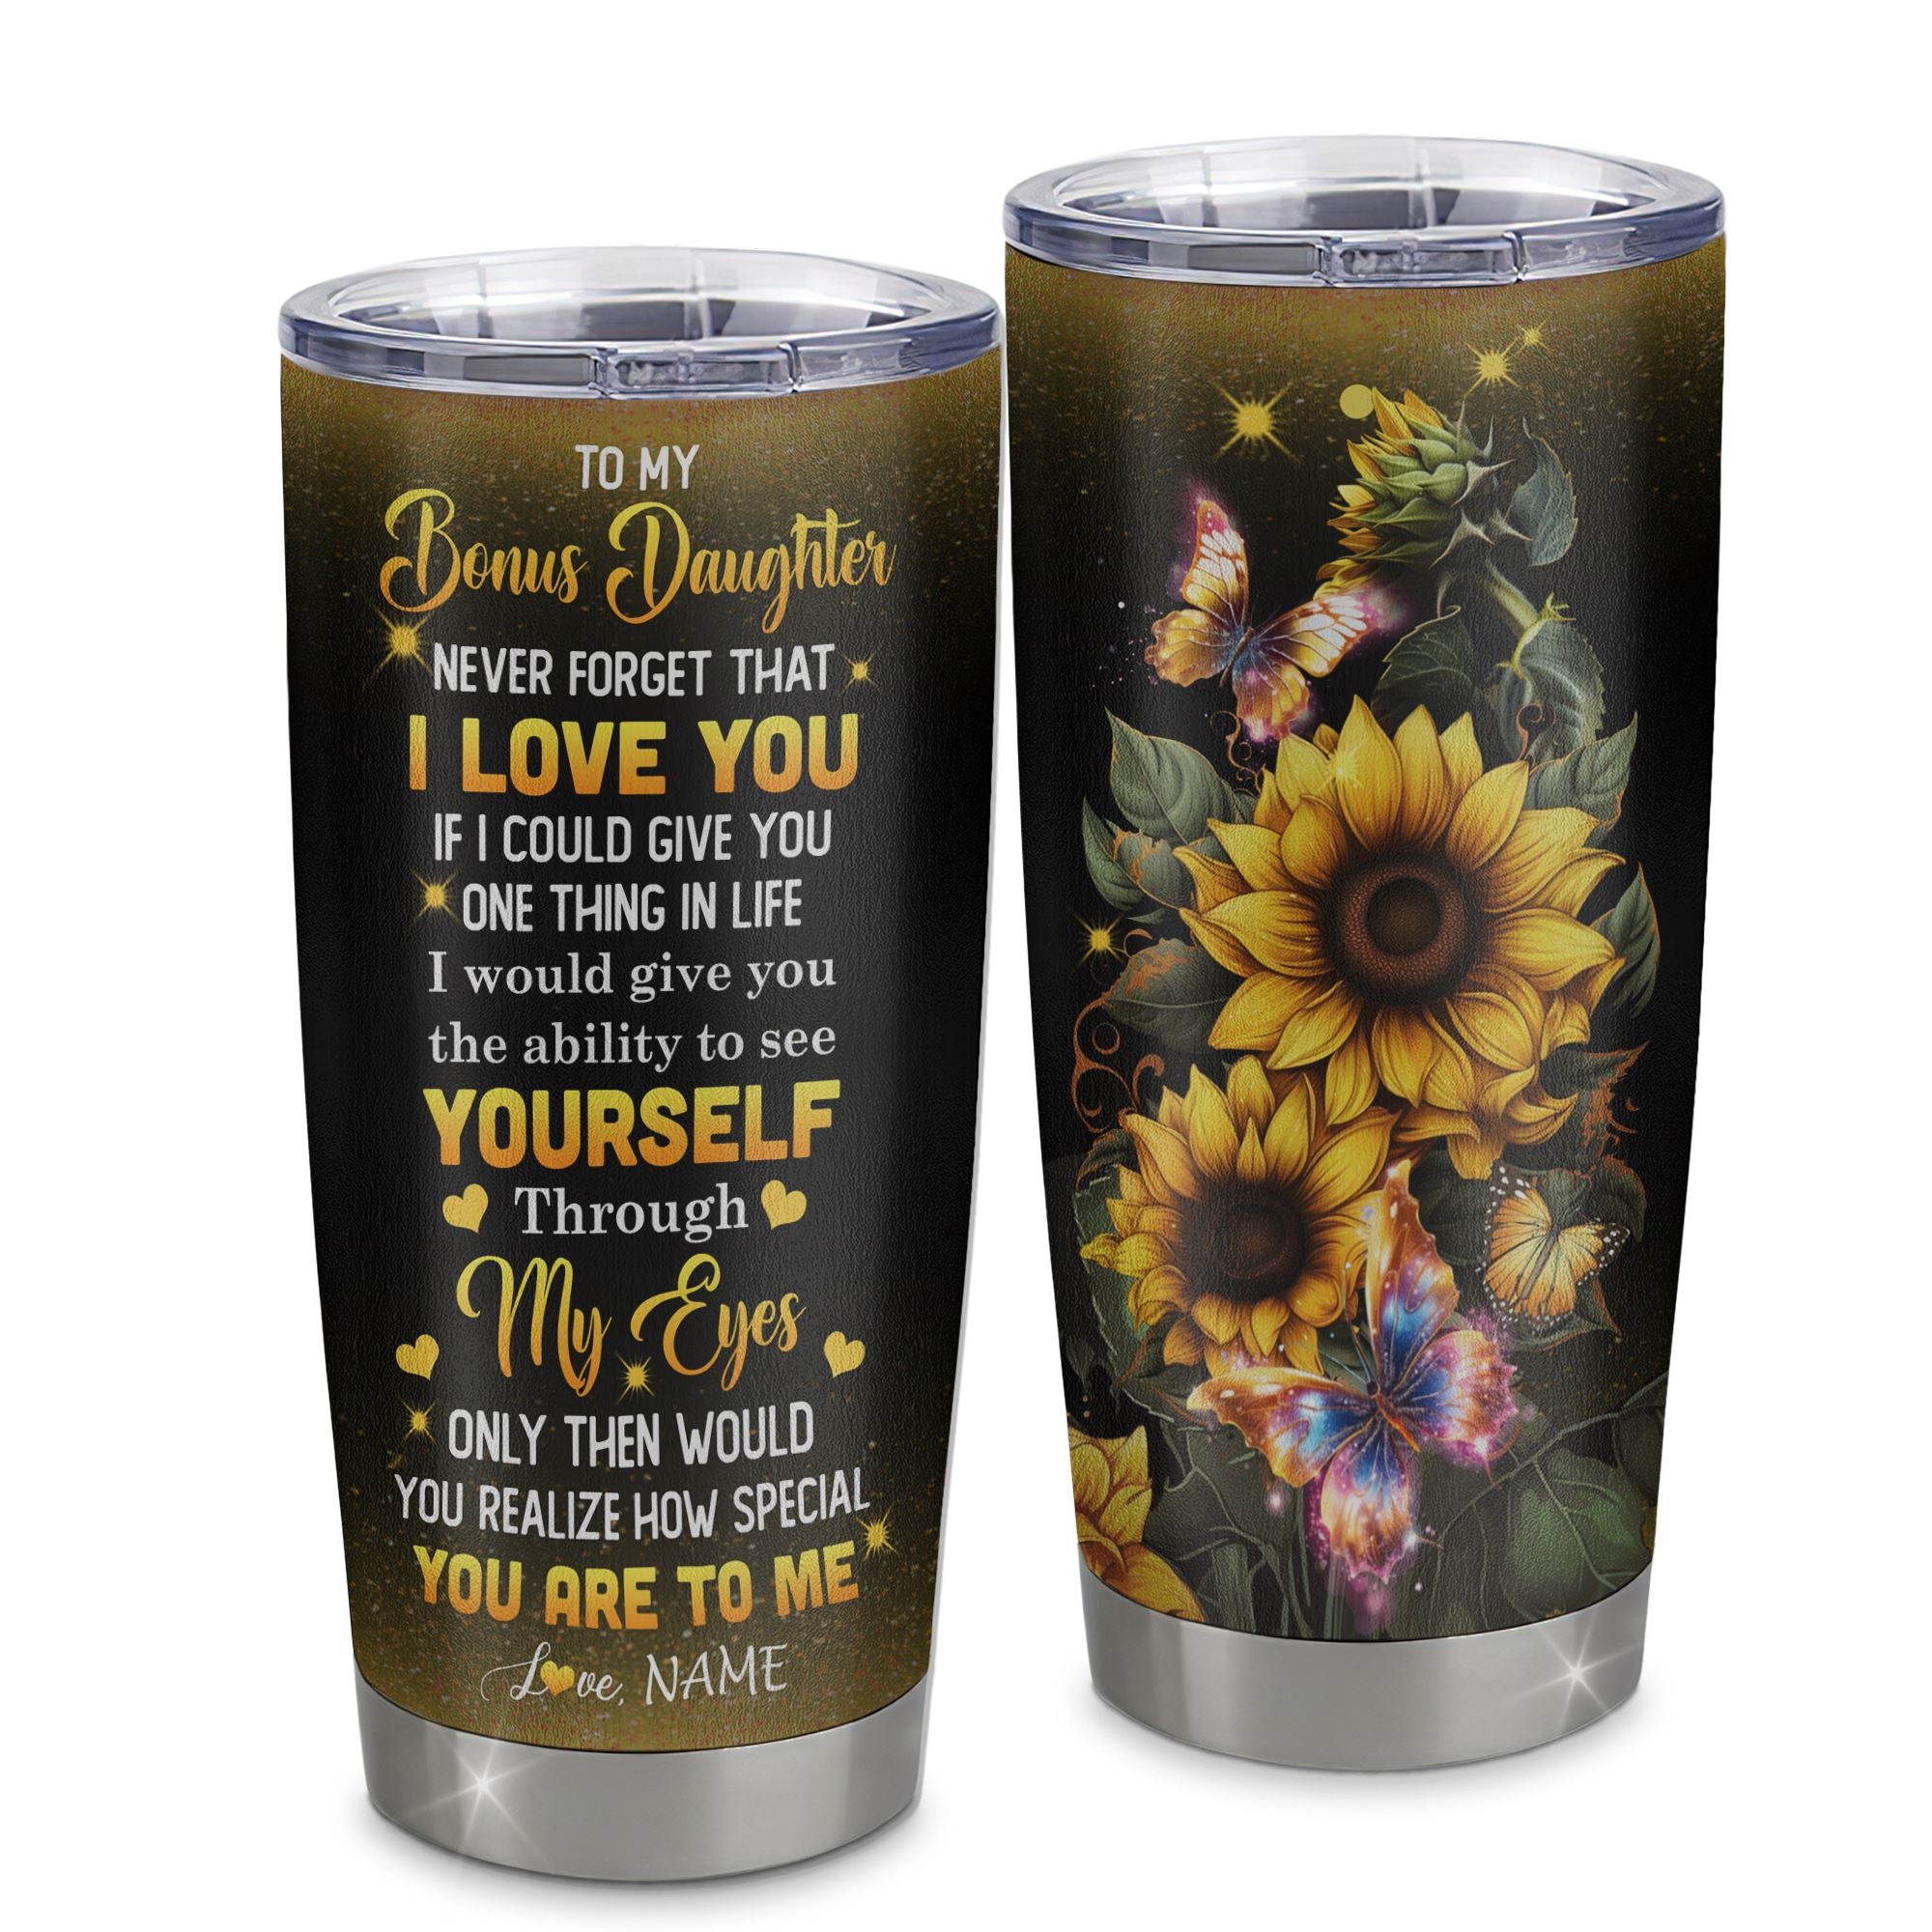 Personalized_To_My_Bonus_Daughter_Tumbler_From_Bonus_Mom_Sunflower_Stainless_Steel_Cup_Never_Forget_That_I_Love_You_Stepdaughter_Birthday_Christmas_Travel_Mug_Tumbler_mockup_1.jpg